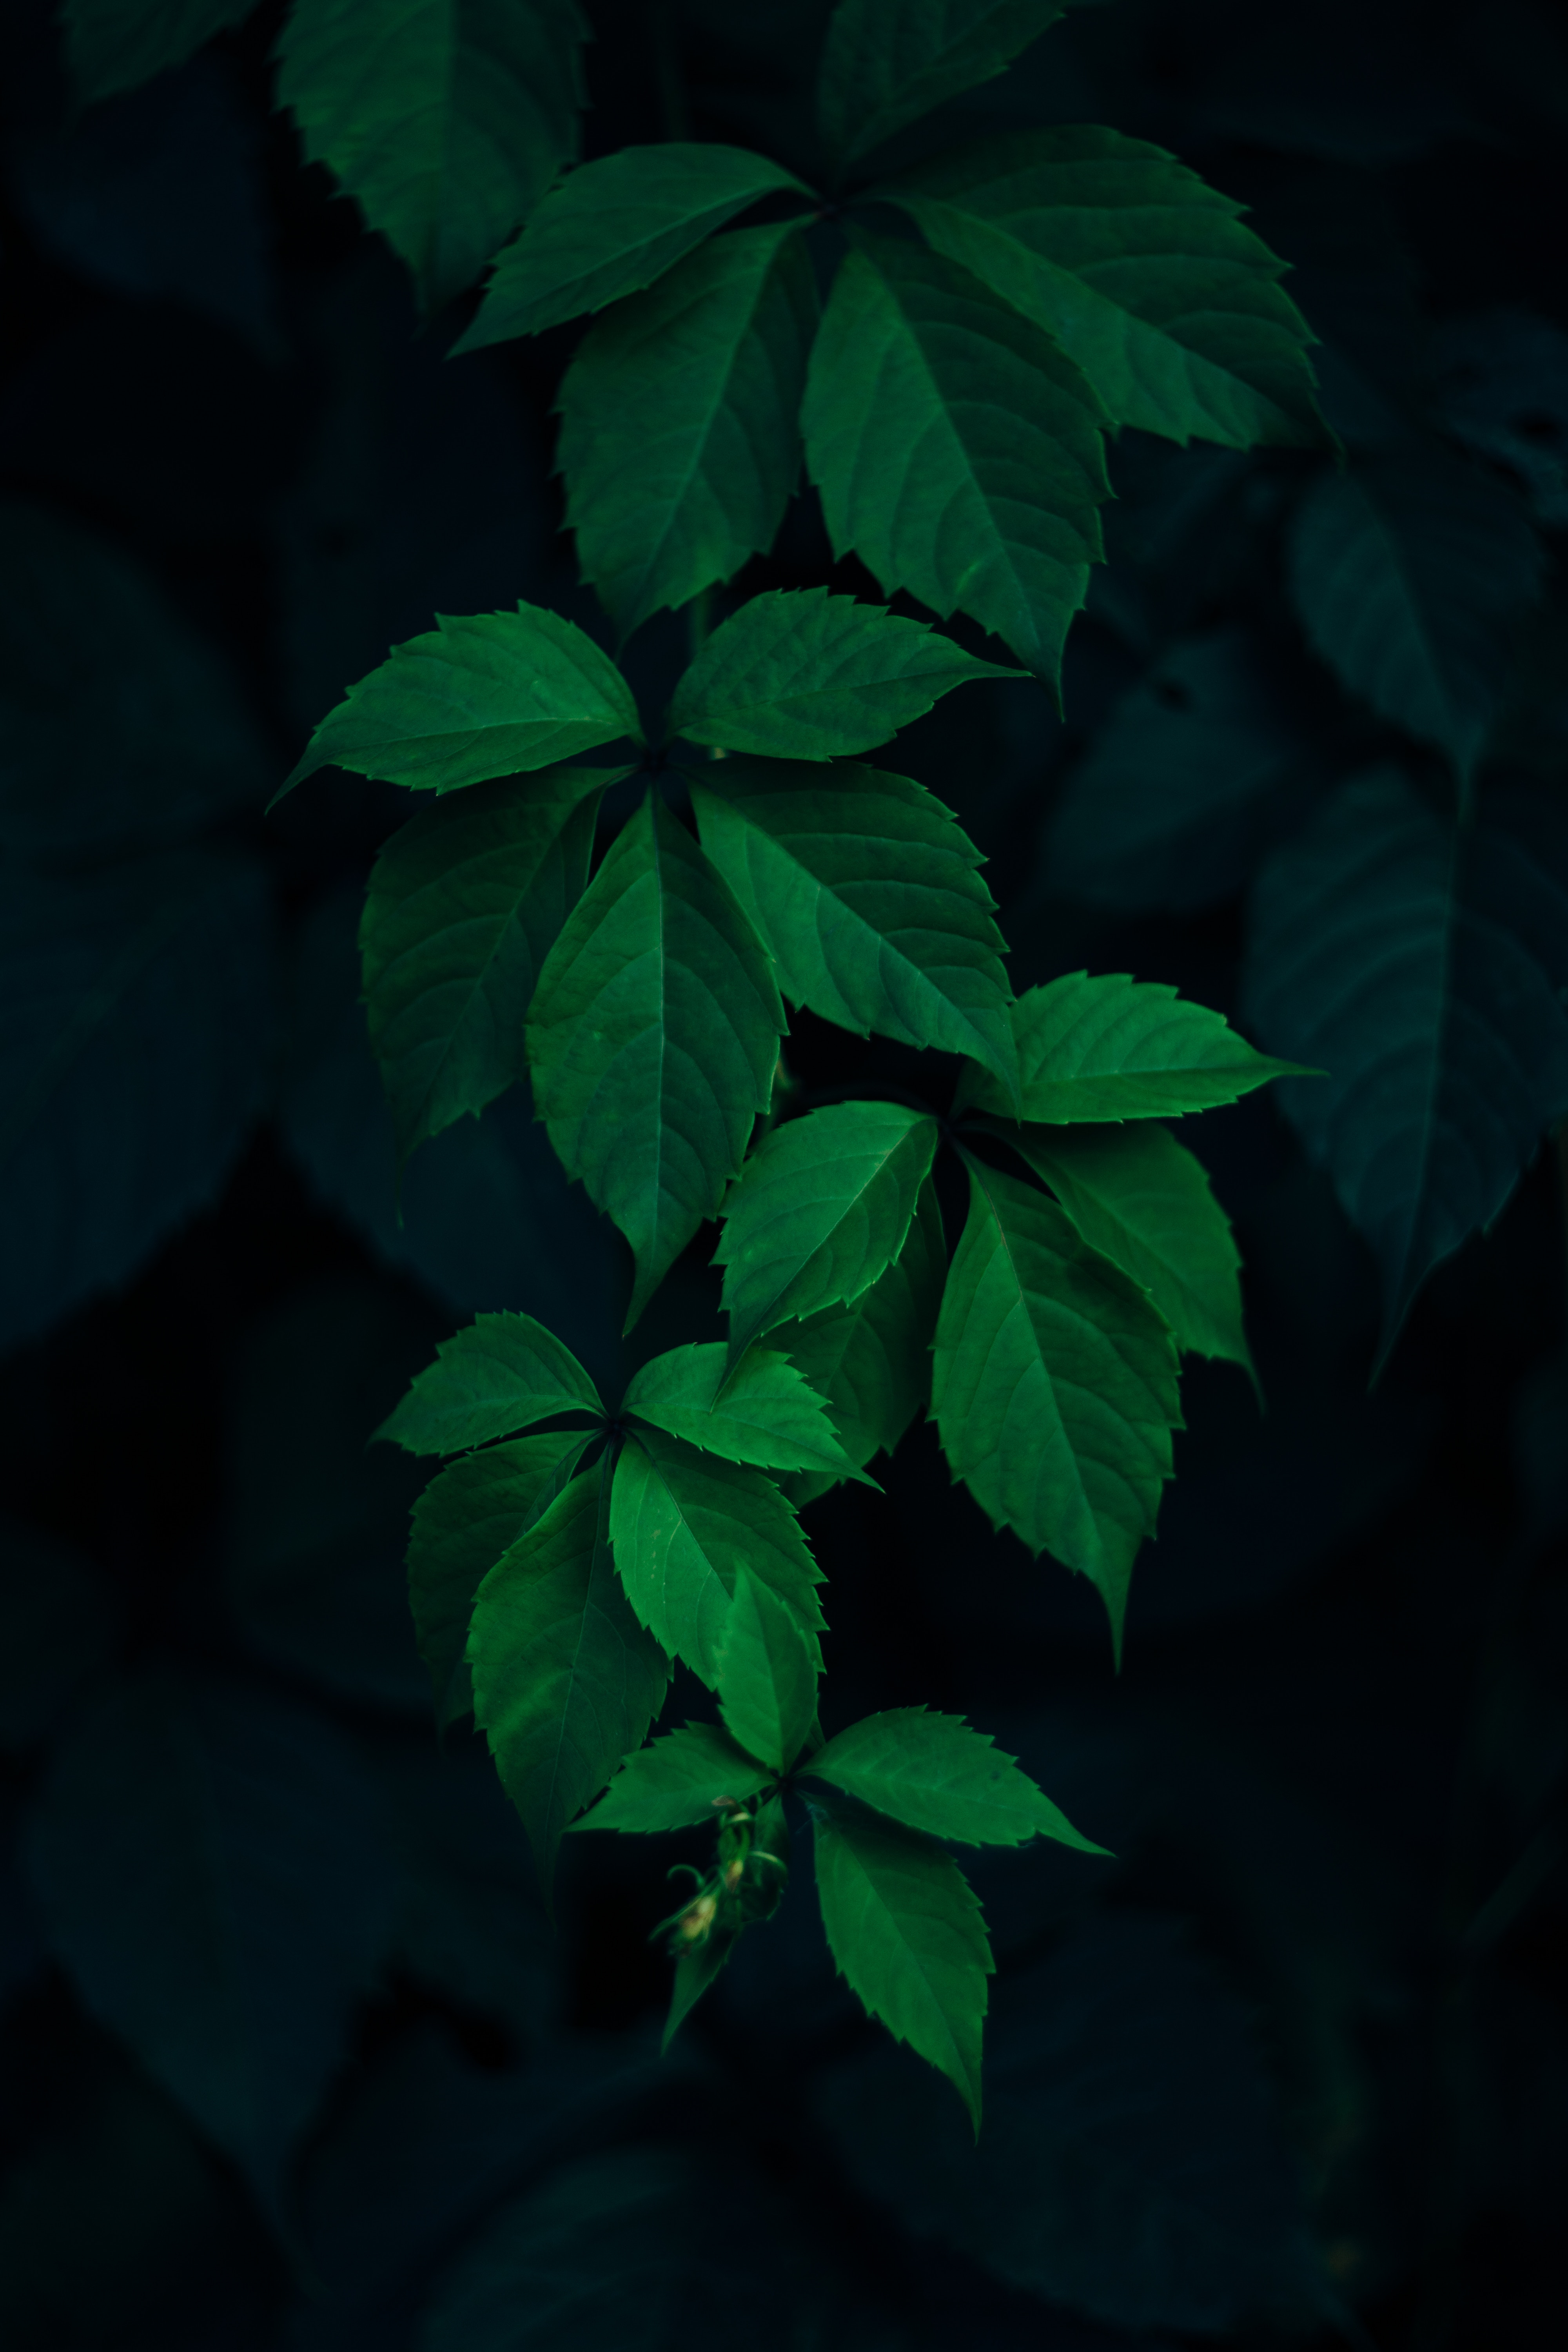 leaves, branches, green, dark background, nature 1080p